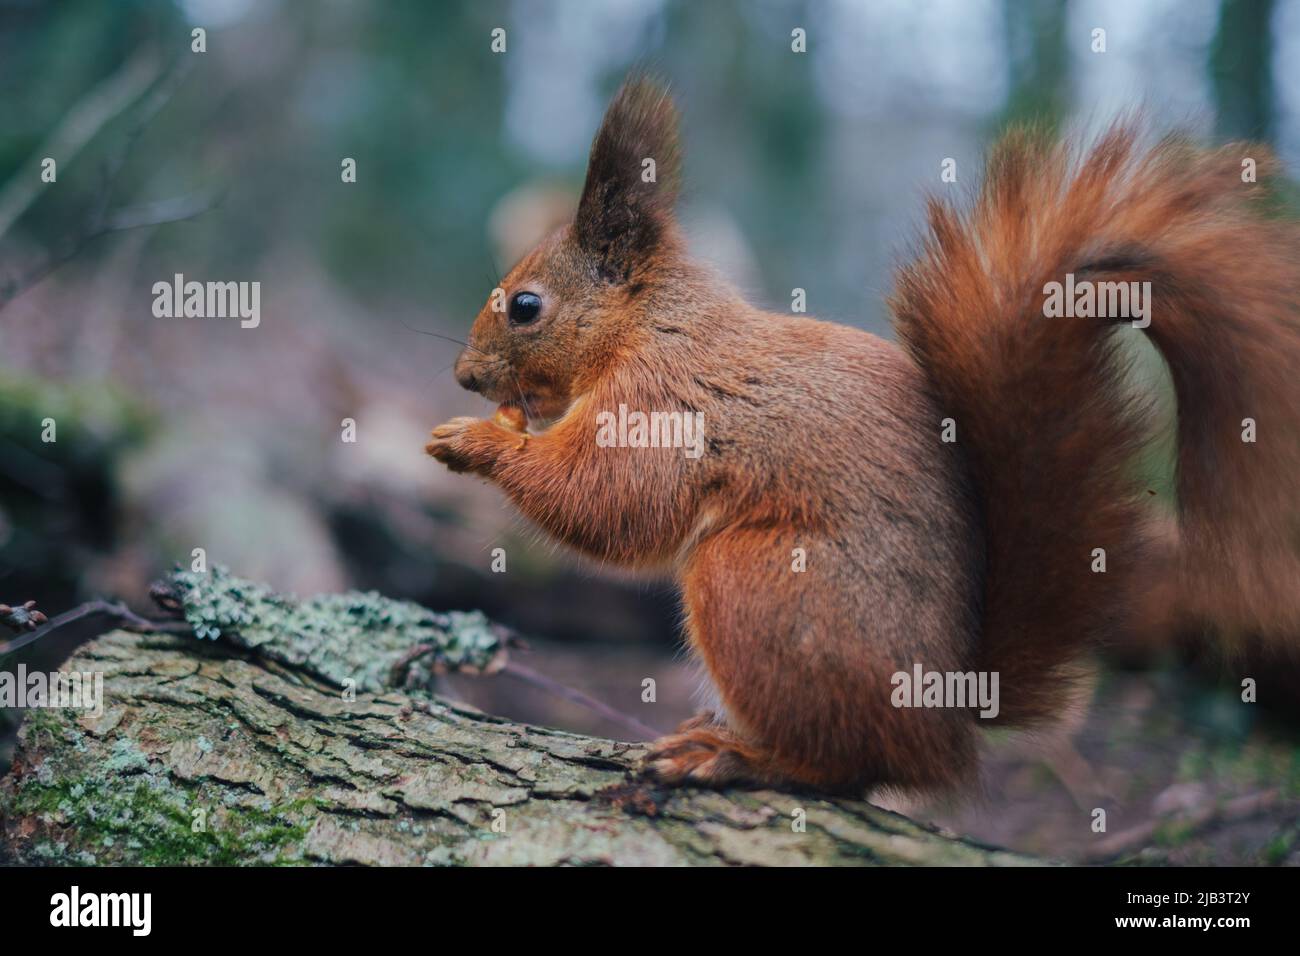 Red squirrel, Isle of Wight Stock Photo